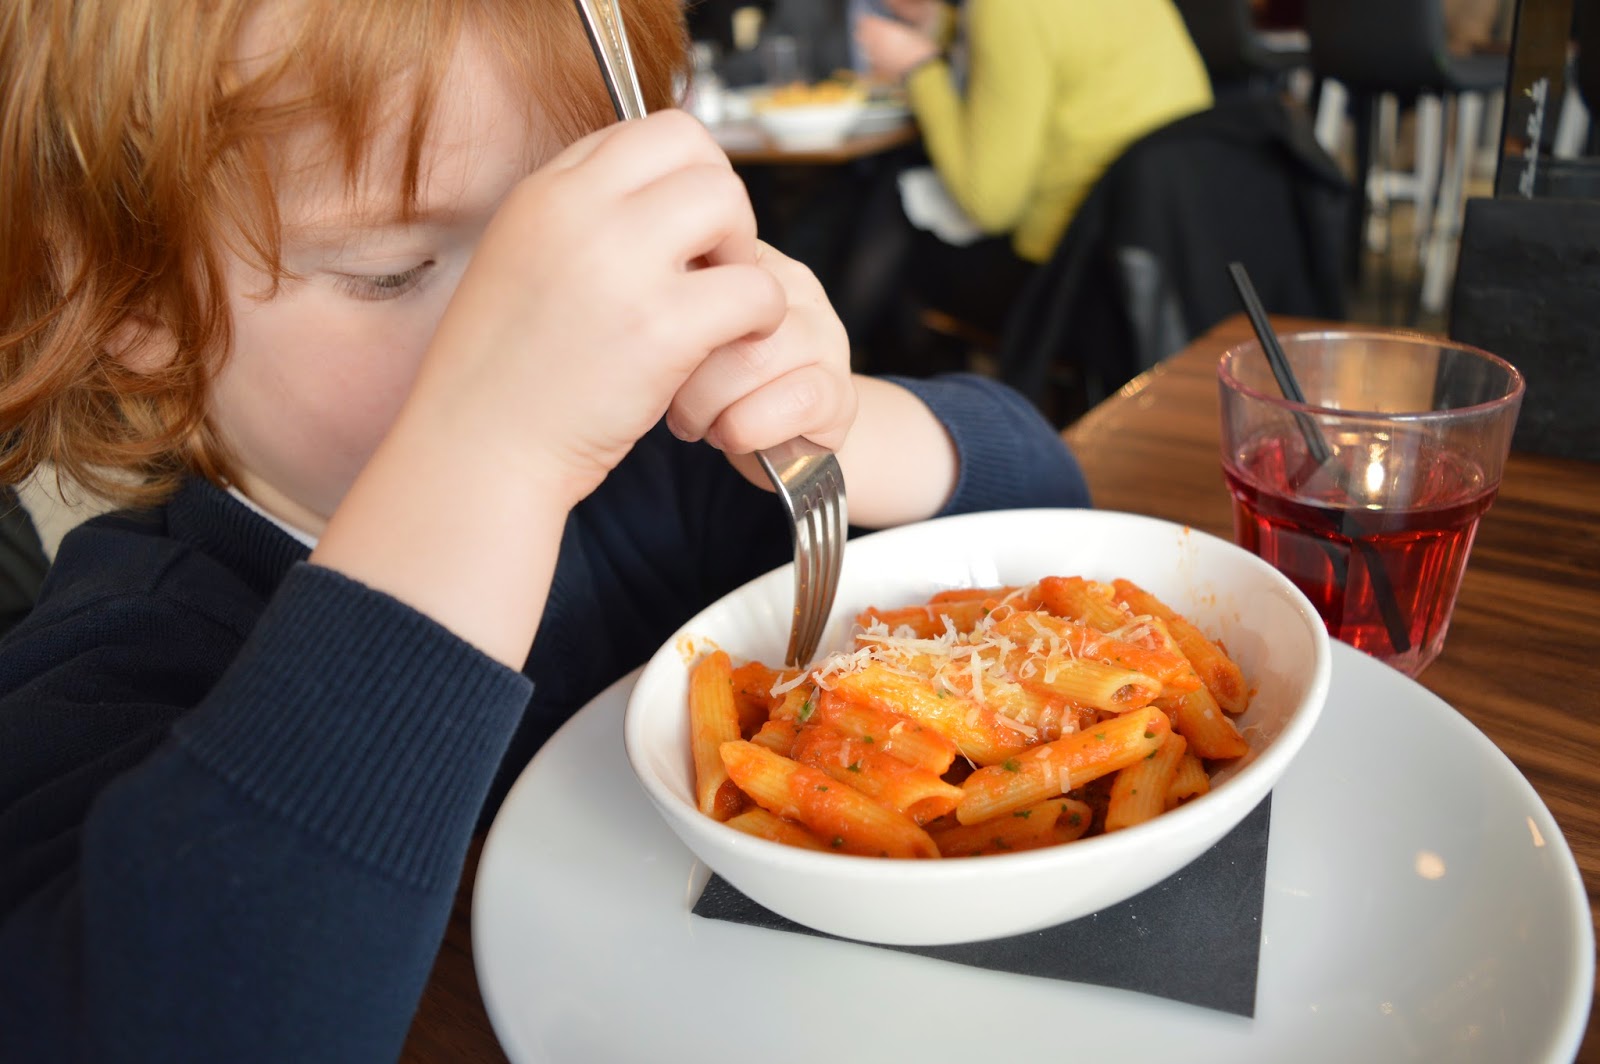 Top 10 Child Friendly Restaurants in Newcastle City Centre - Tyneside Bar Cafe